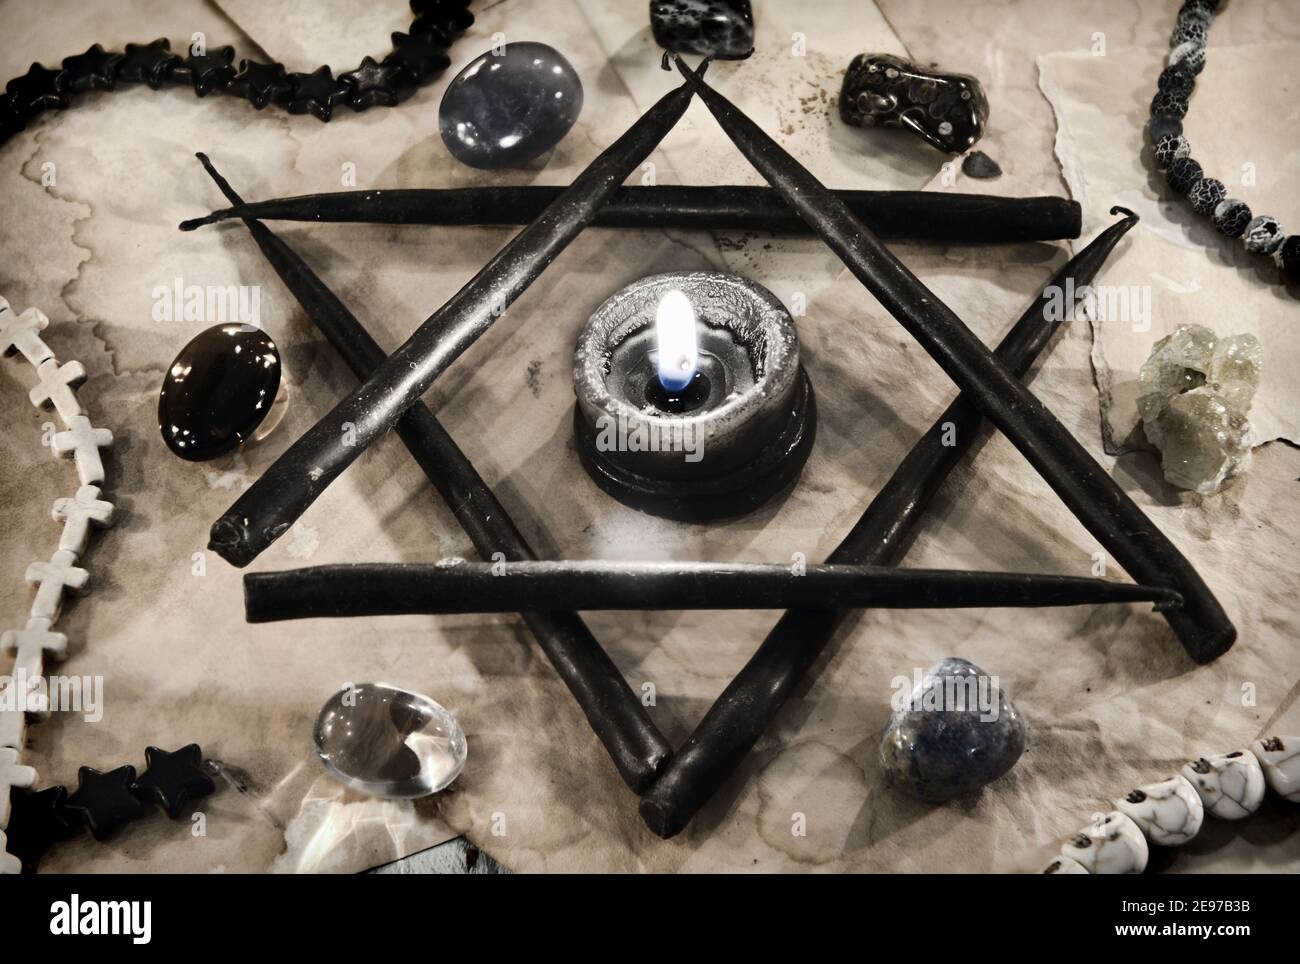 Pentagram symbol made of black candles with crystal stones on paper.  Esoteric, gothic and occult background, Halloween mystic concept. Stock Photo